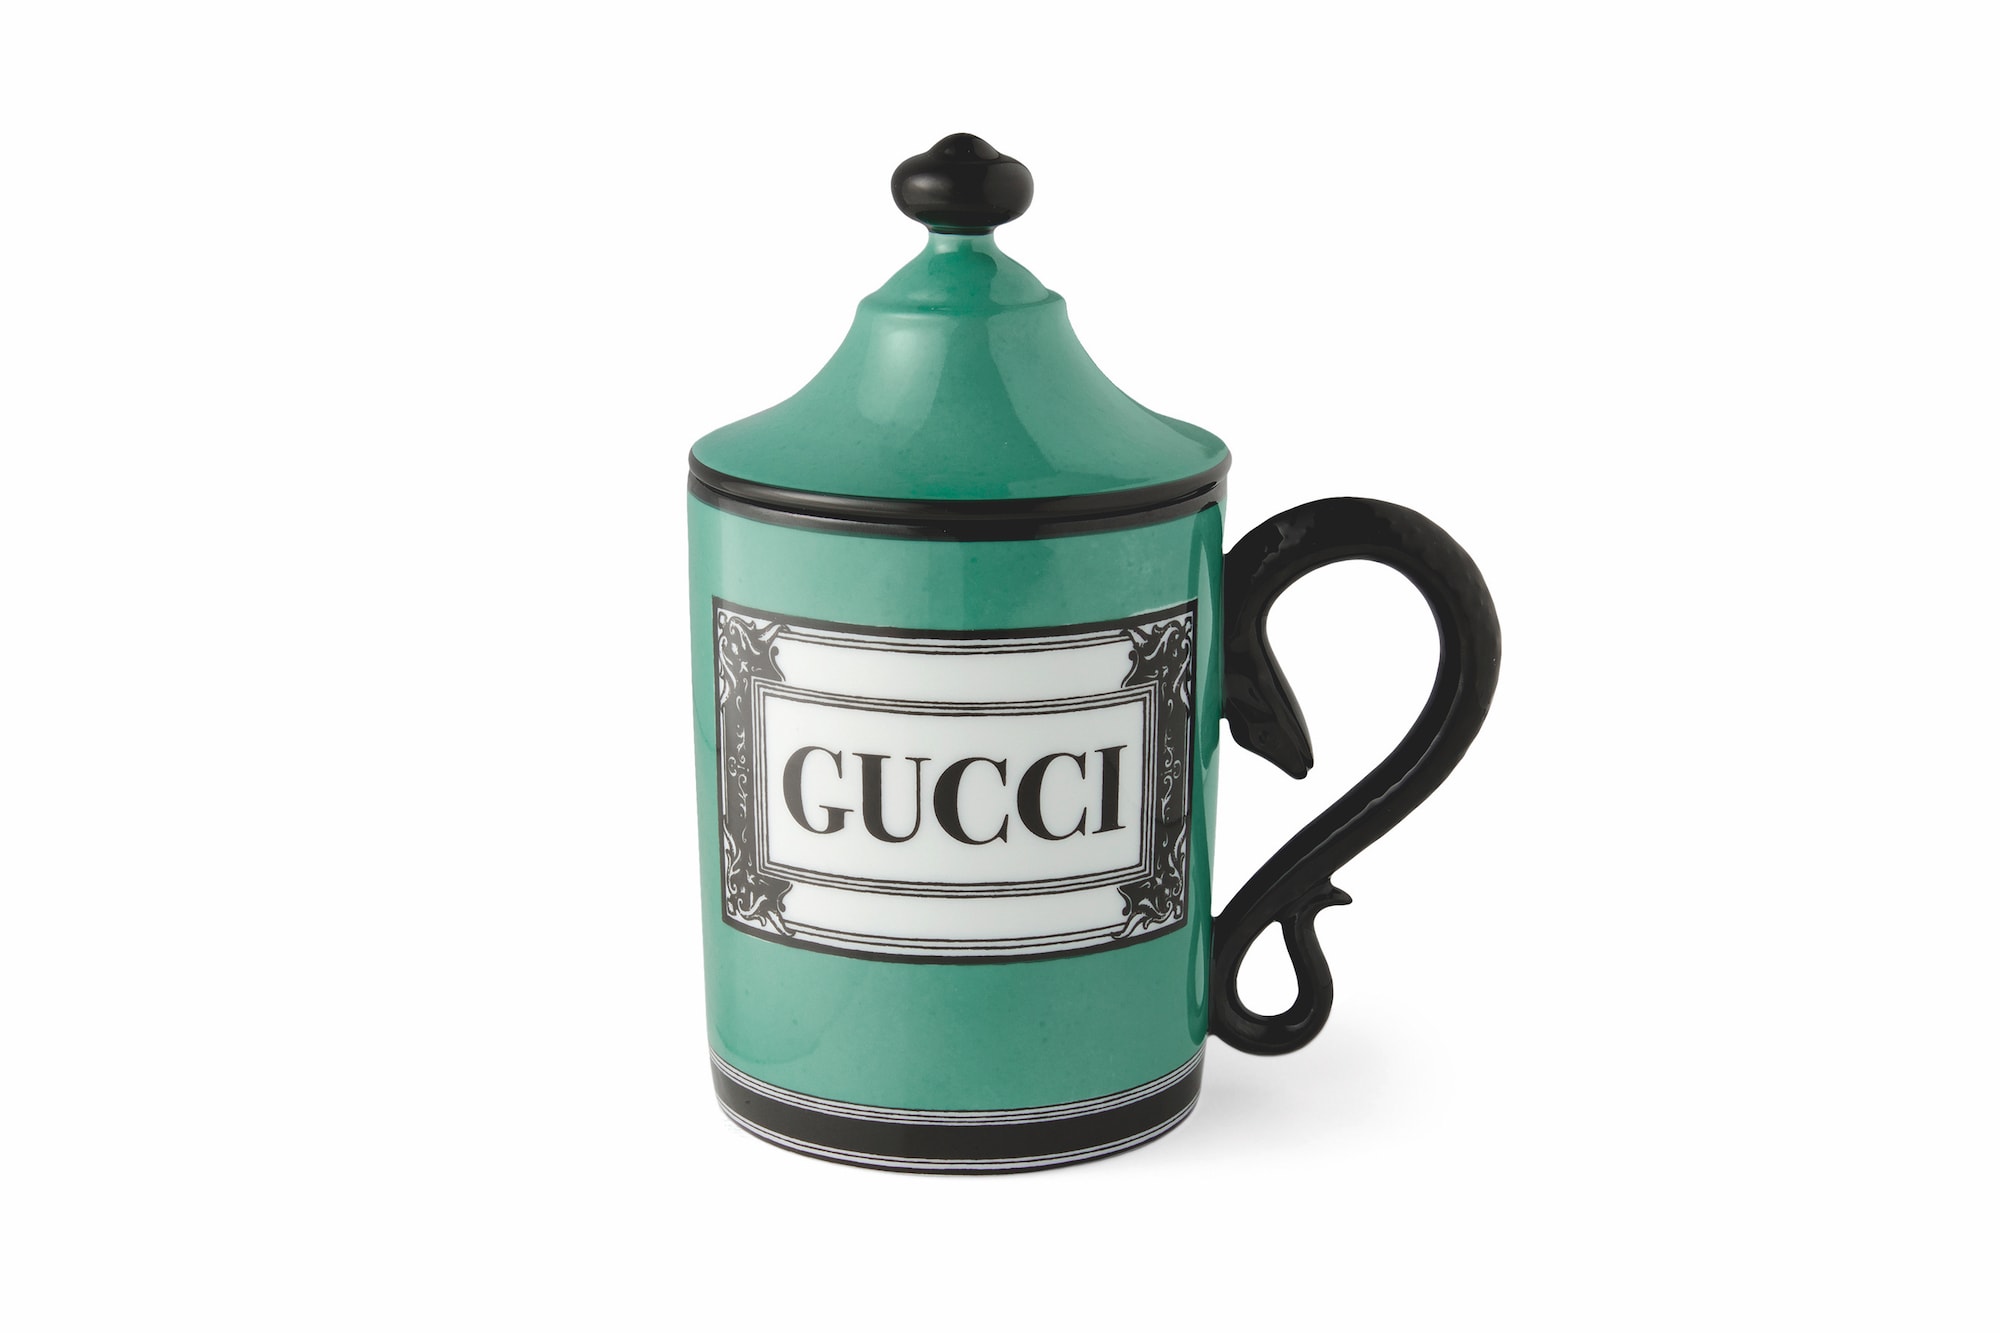 Gucci Decor SS19 Furniture Collection Spring Summer Pillow Monogram Blanket Candle 